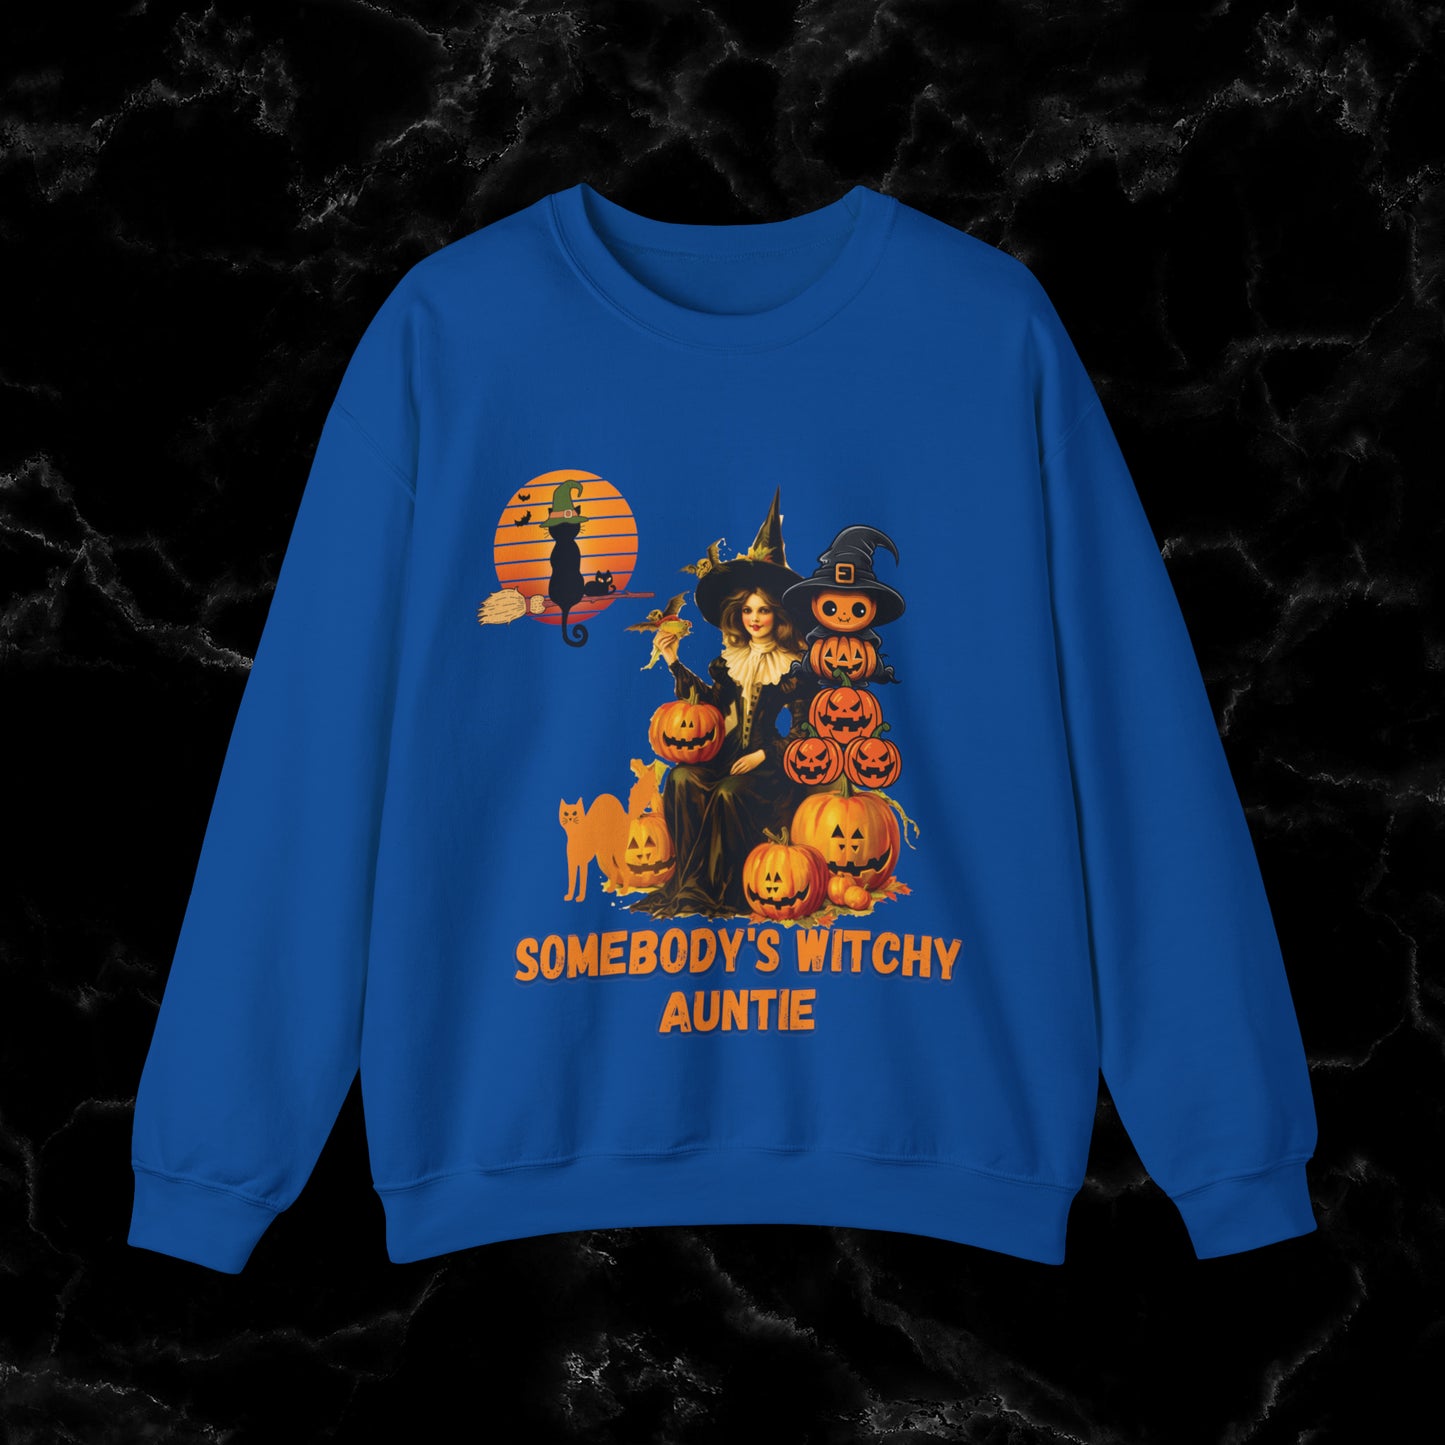 Somebody's Witchy Auntie Sweatshirt - Cool Aunt Shirt for Halloween Sweatshirt S Royal 